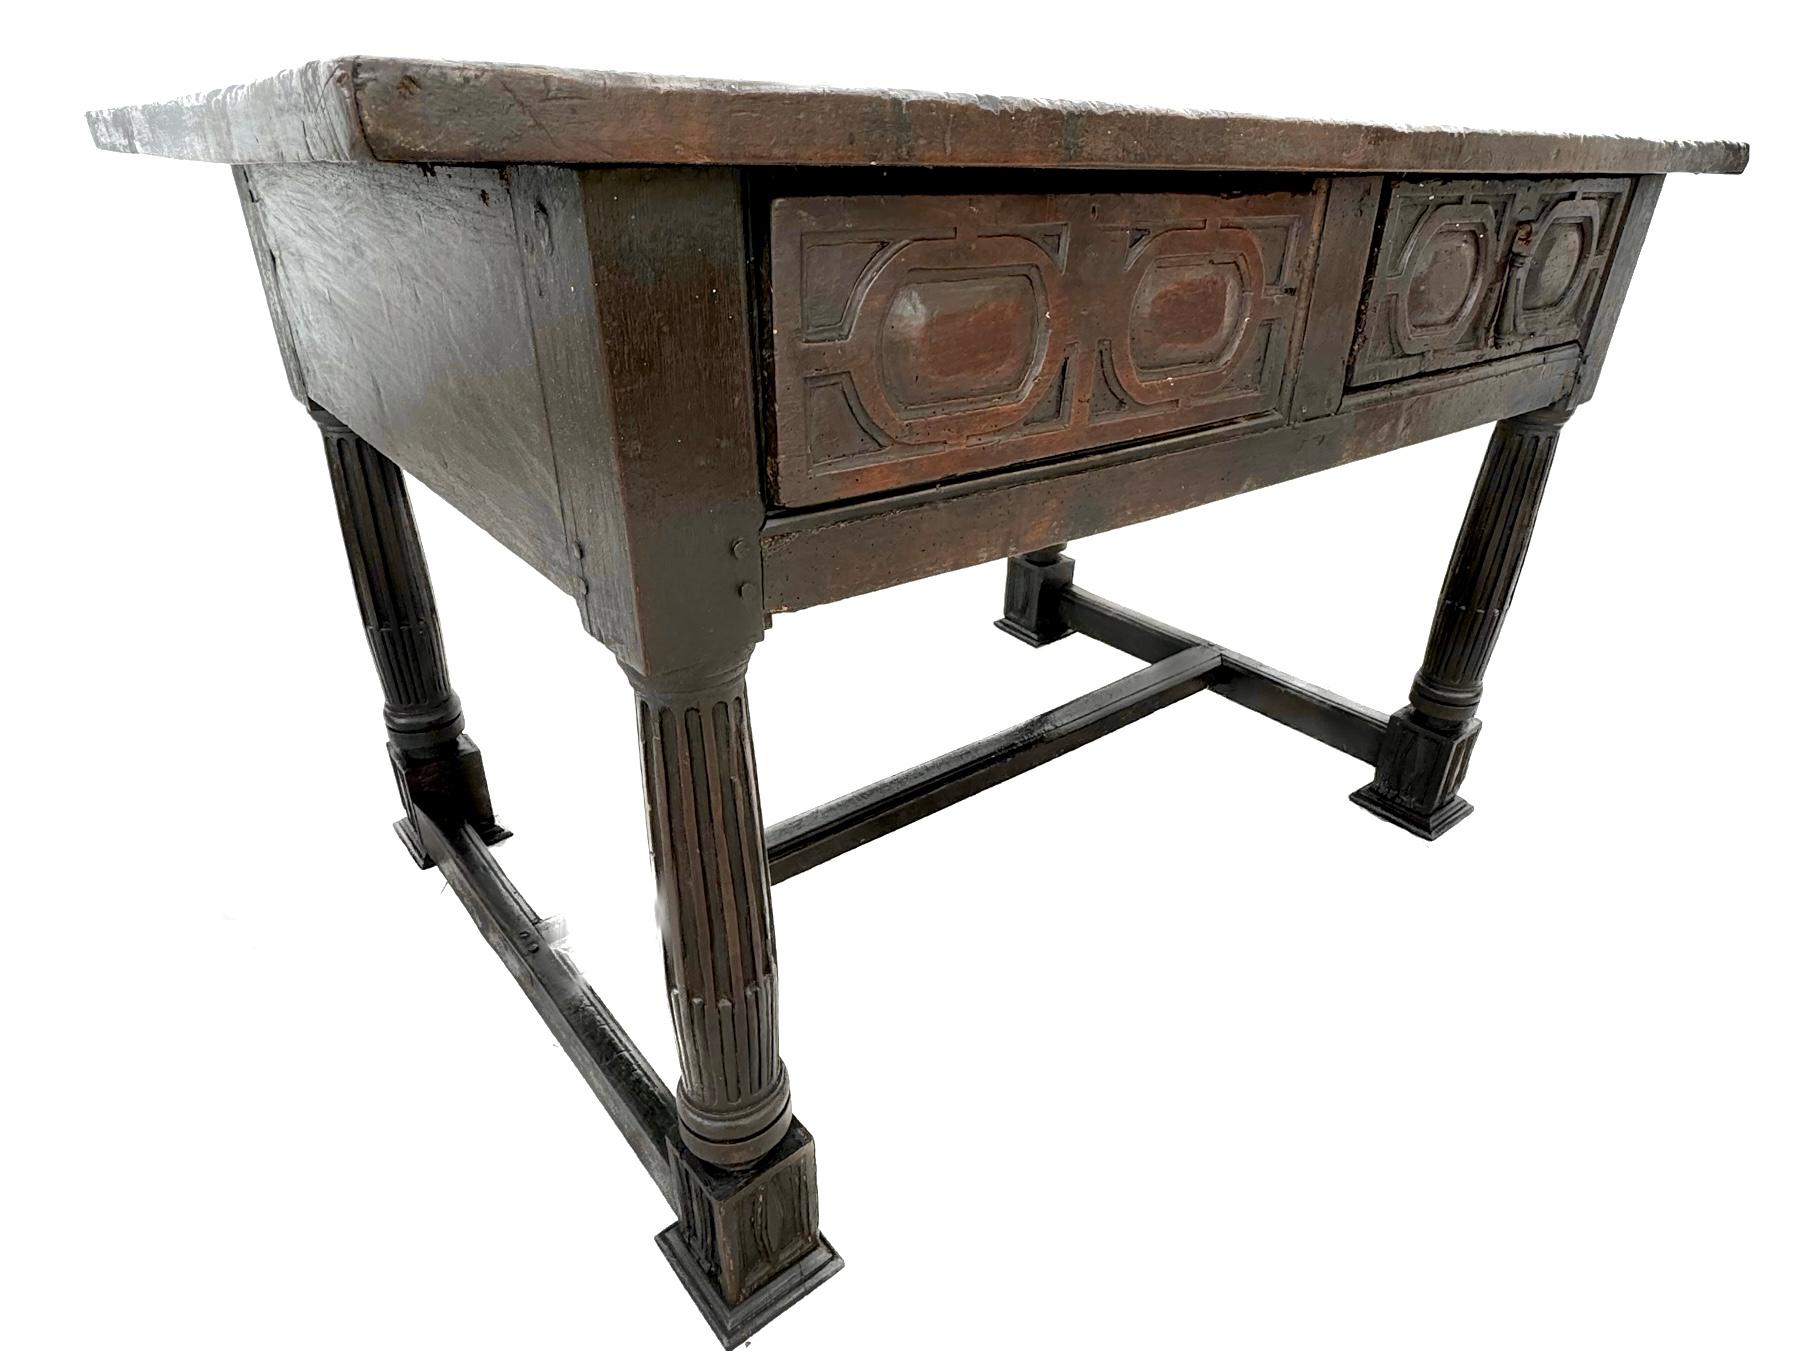 17th century Italian work table with two Carved front drawers and H-shaped stretcher base with turned and fluted legs. Really nice carved fluted columns and drawer fronts with original iron hardware. Wonderful patina and an old world ambience. 